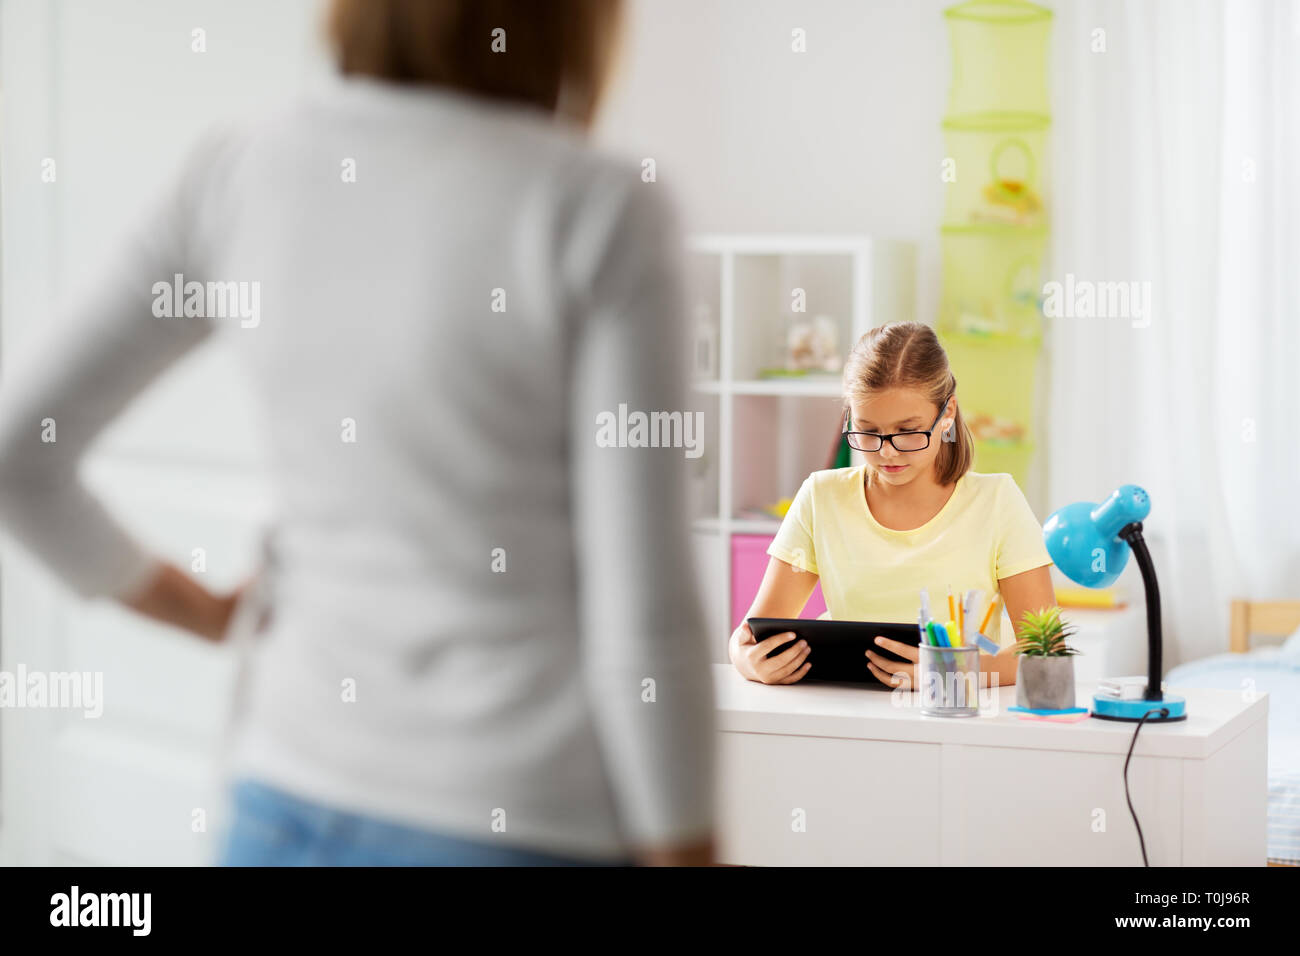 student girl using tablet computer during homework Stock Photo